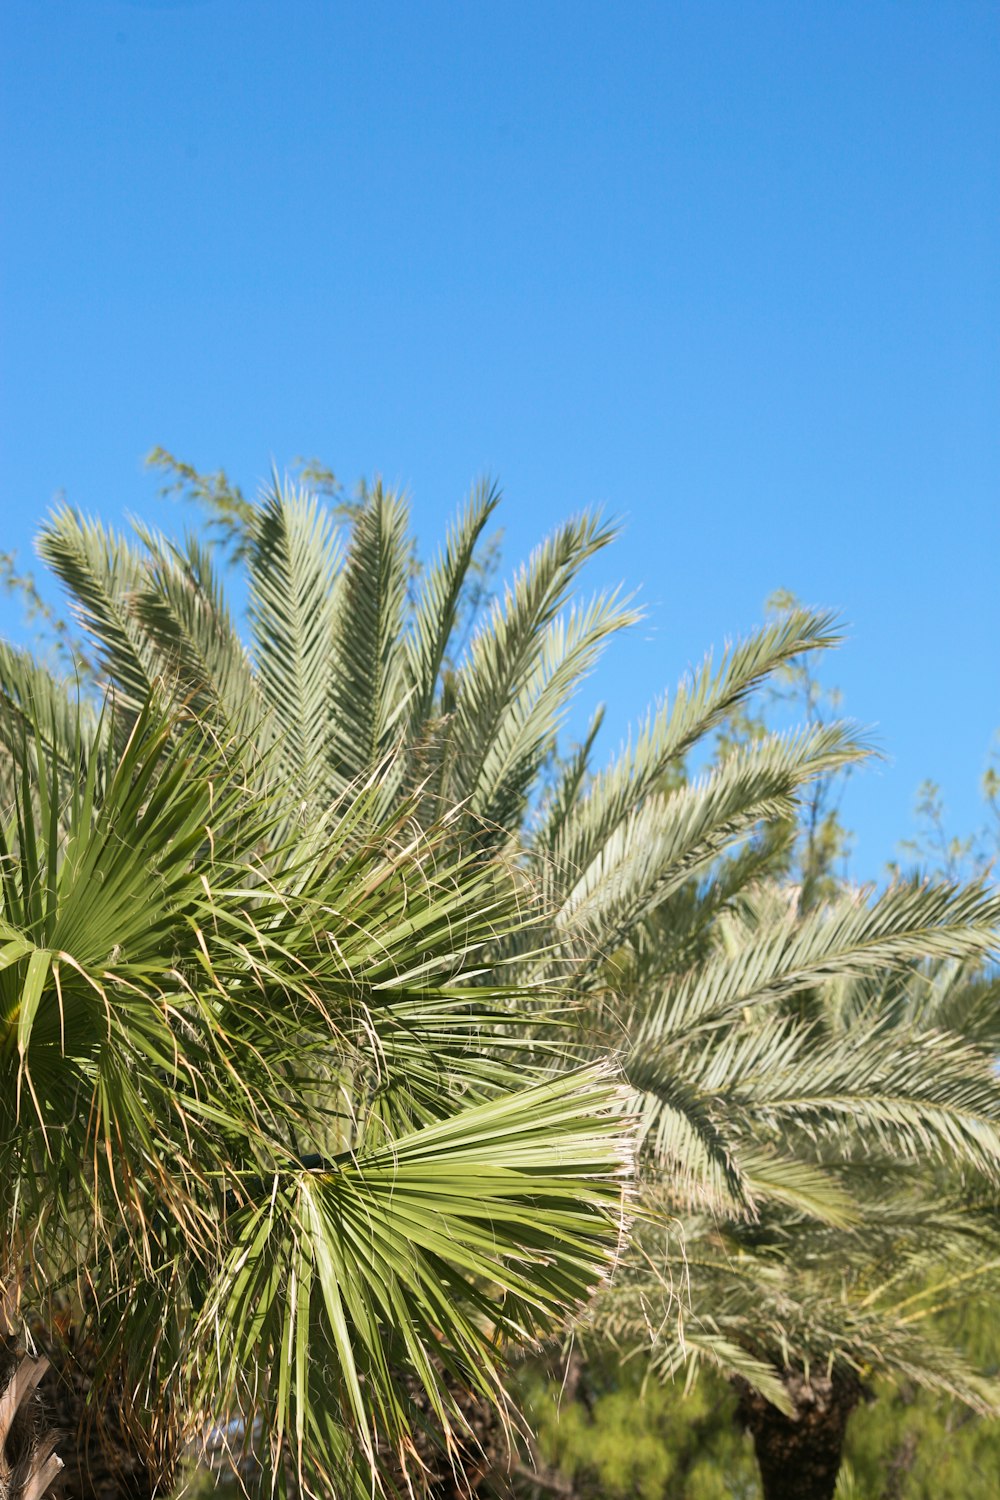 sago palm and fan palm trees